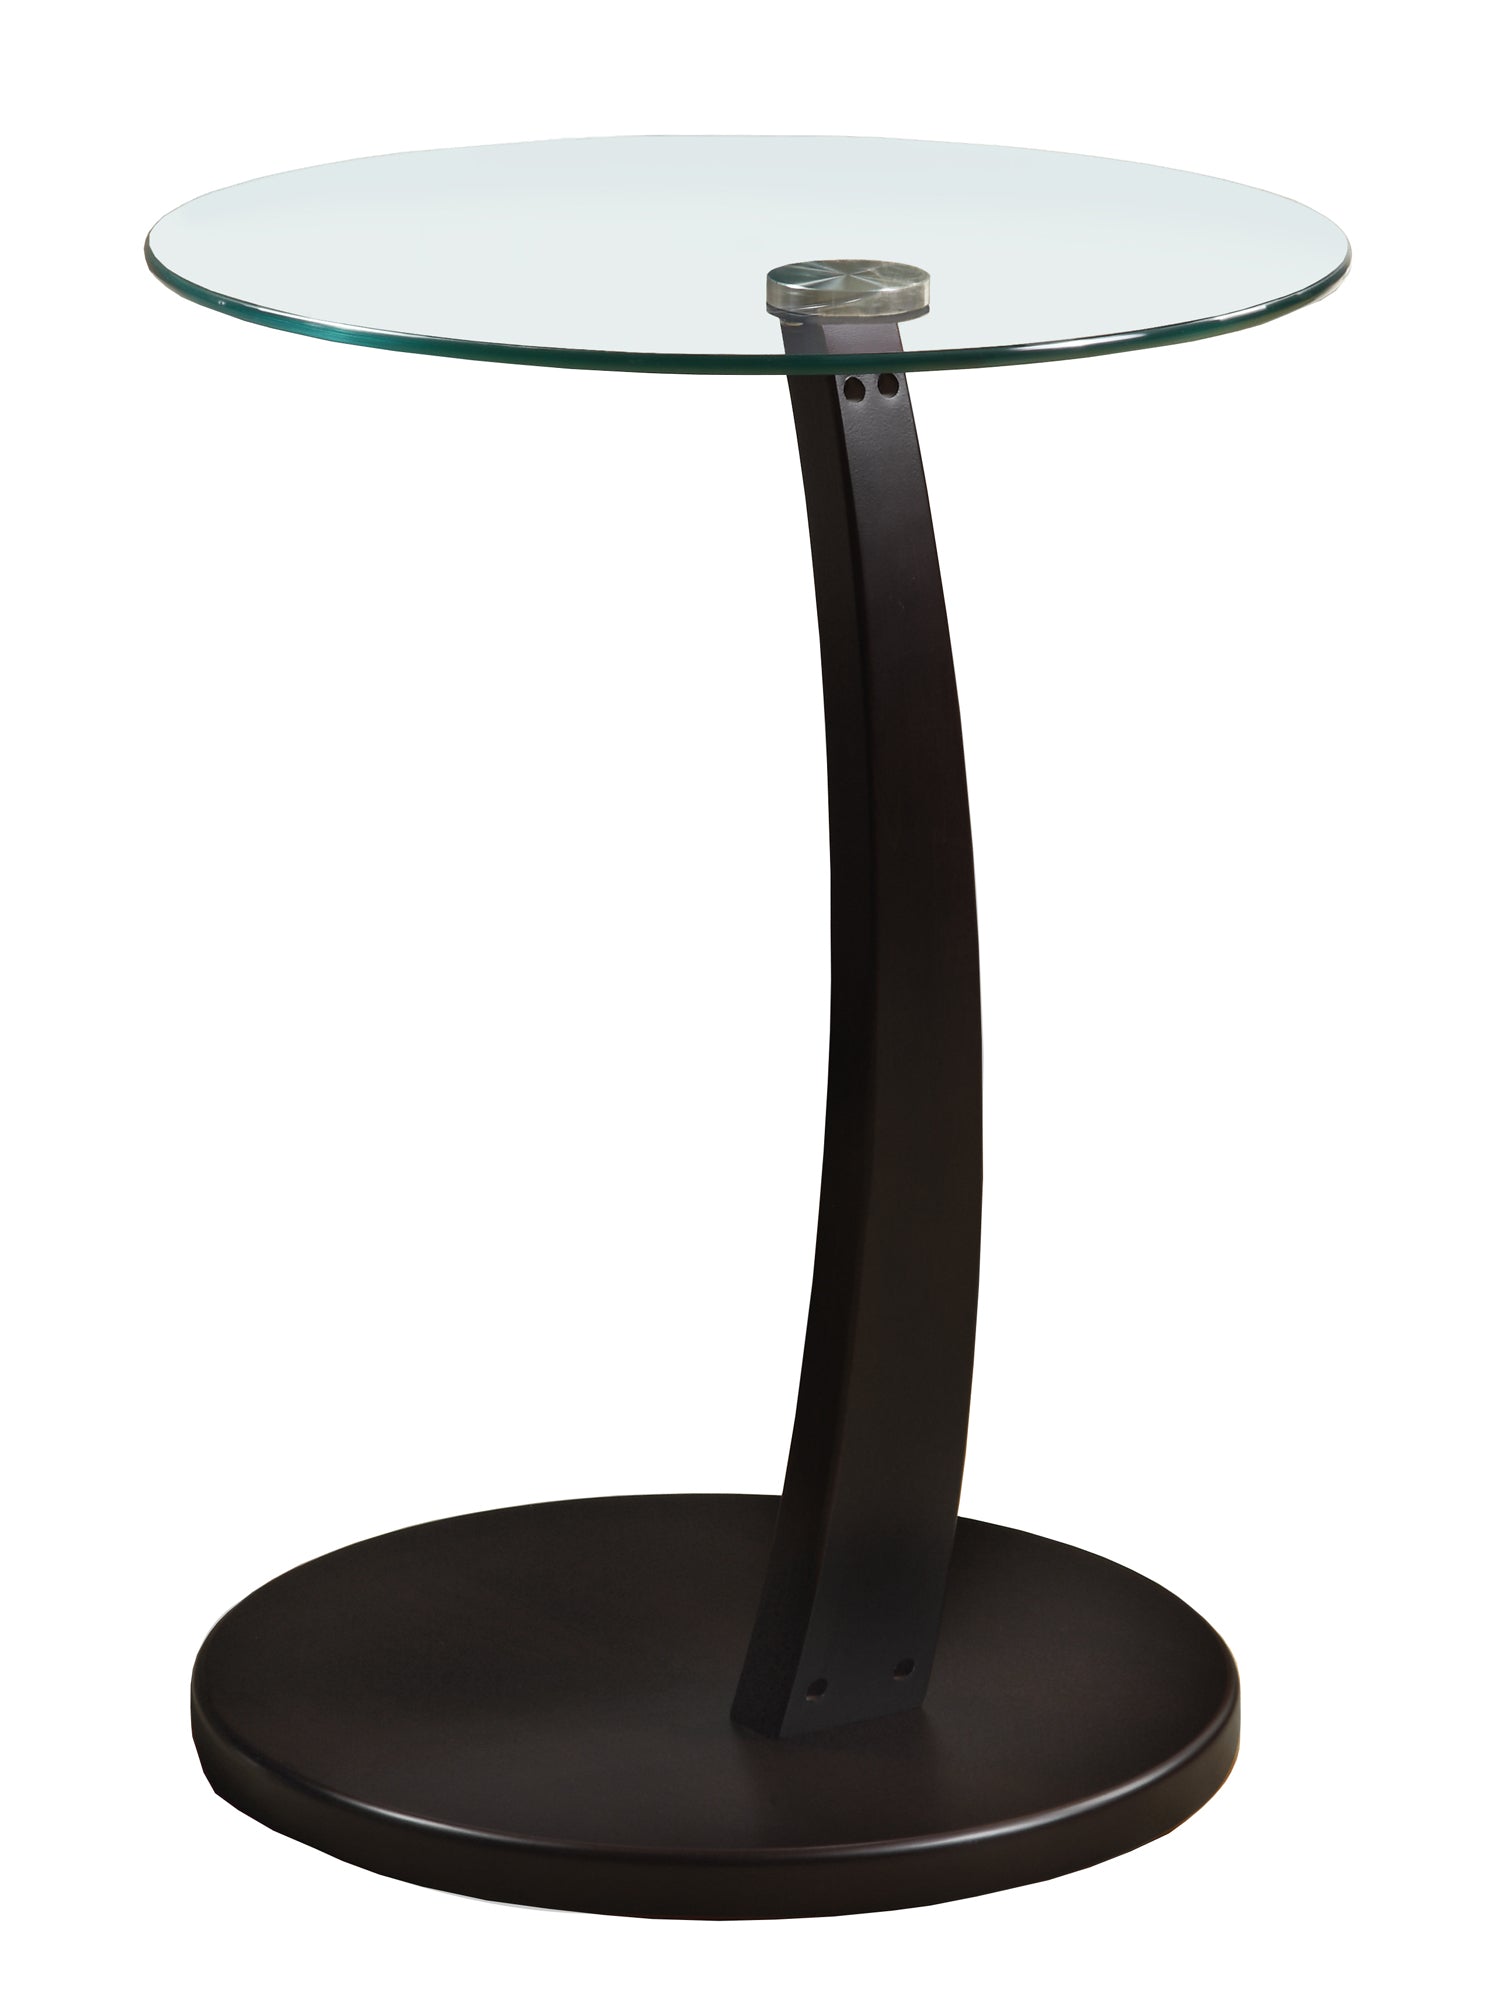 MN-743001    Accent Table, C-Shaped, End, Side, Snack, Living Room, Bedroom, Laminate, Tempered Glass, Dark Brown, Clear, Contemporary, Modern